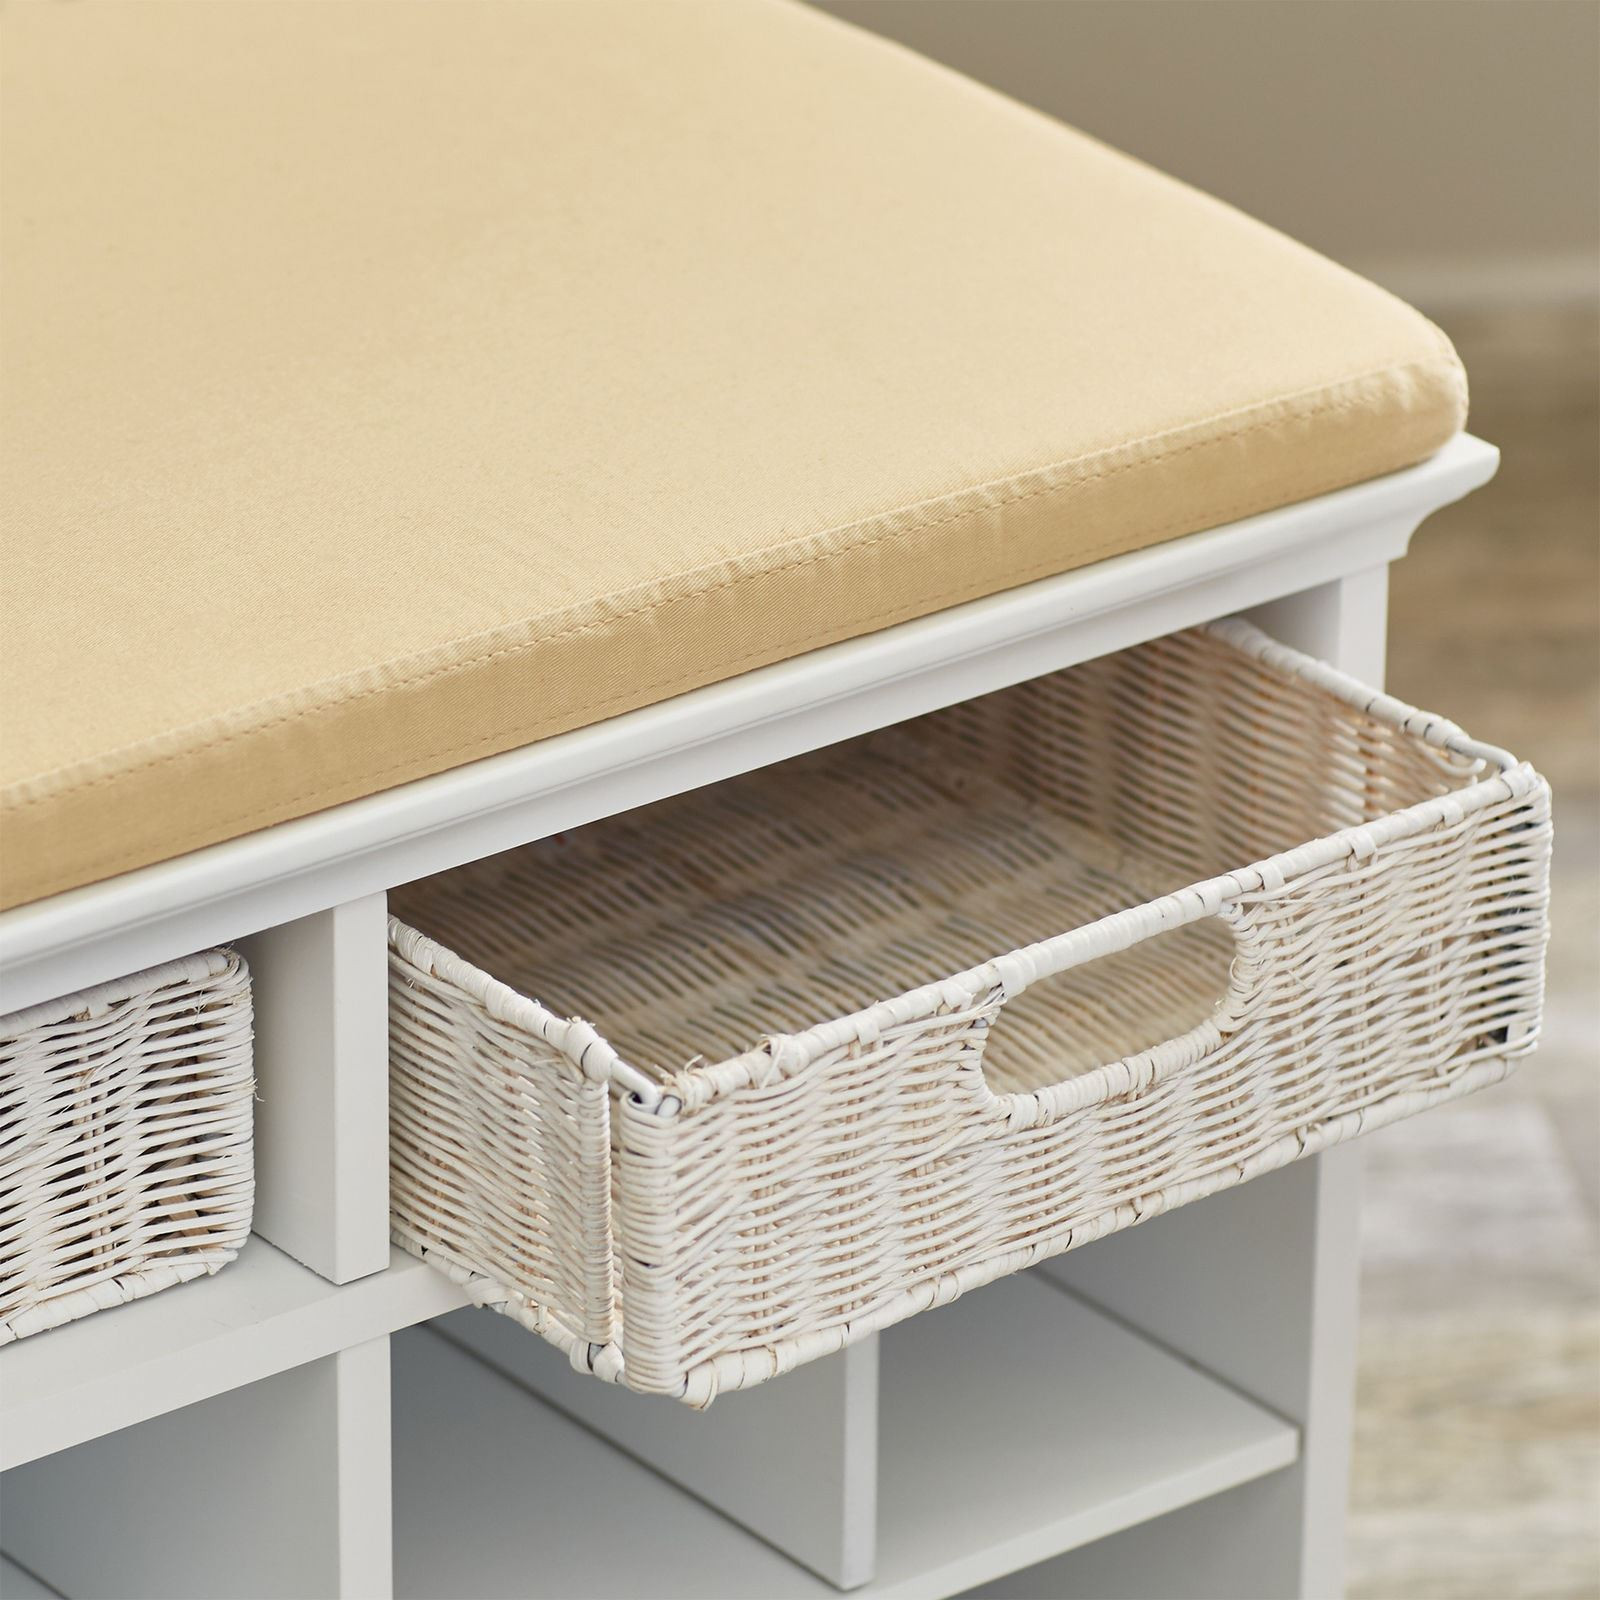 White Bedroom Storage Bench
 NEW White Wooden Shoe Storage Bench Seat Entryway Mud Room